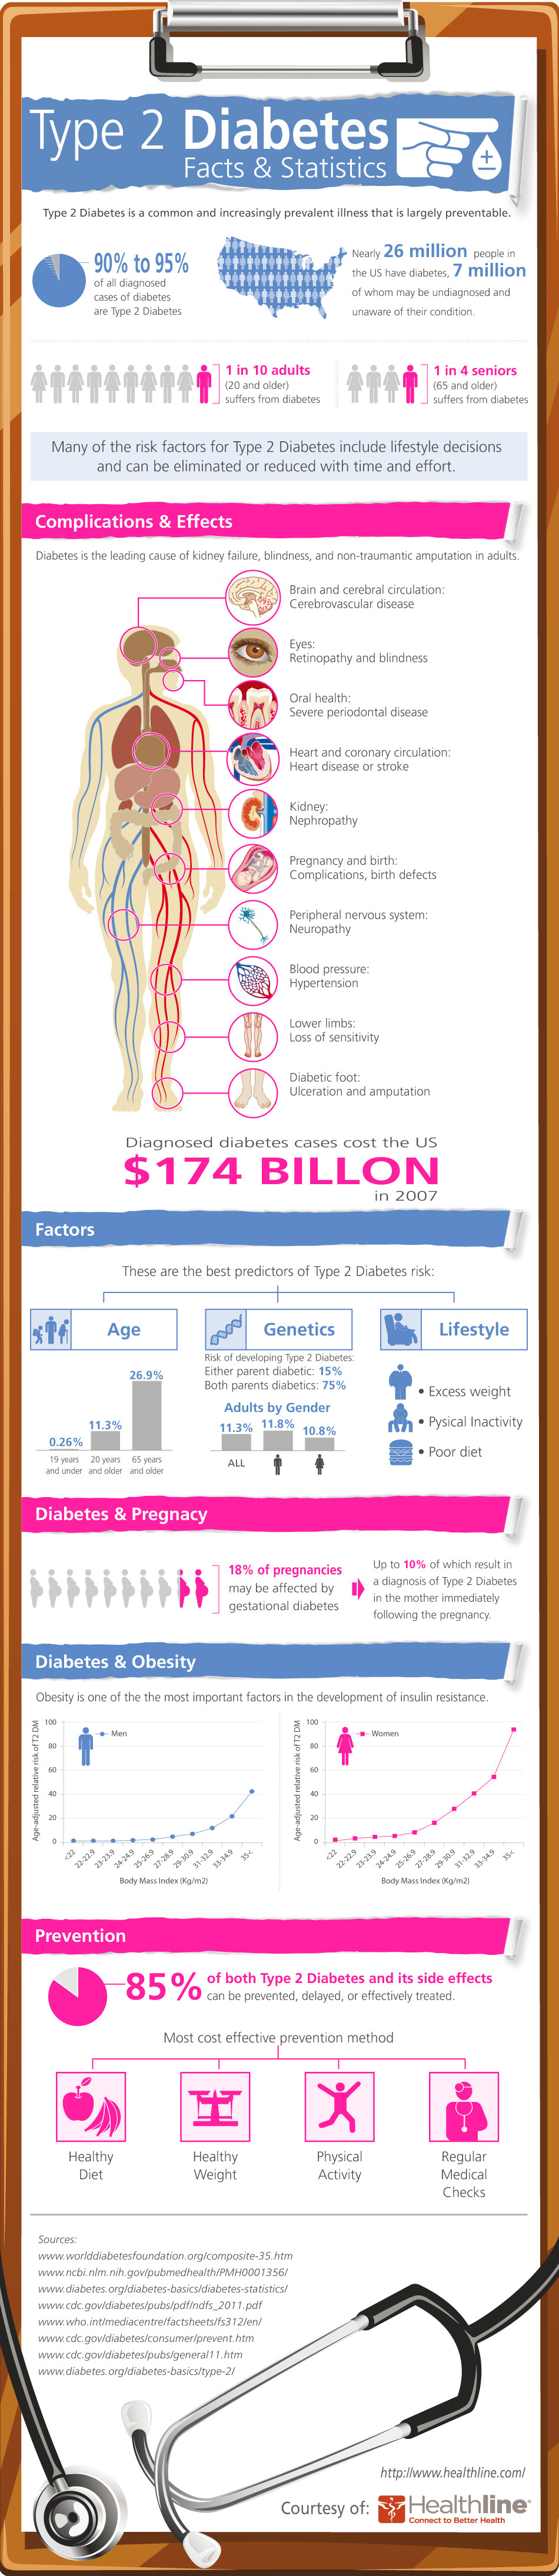 The Not-So-Sweet Facts: Type 2 Diabetes Statistics